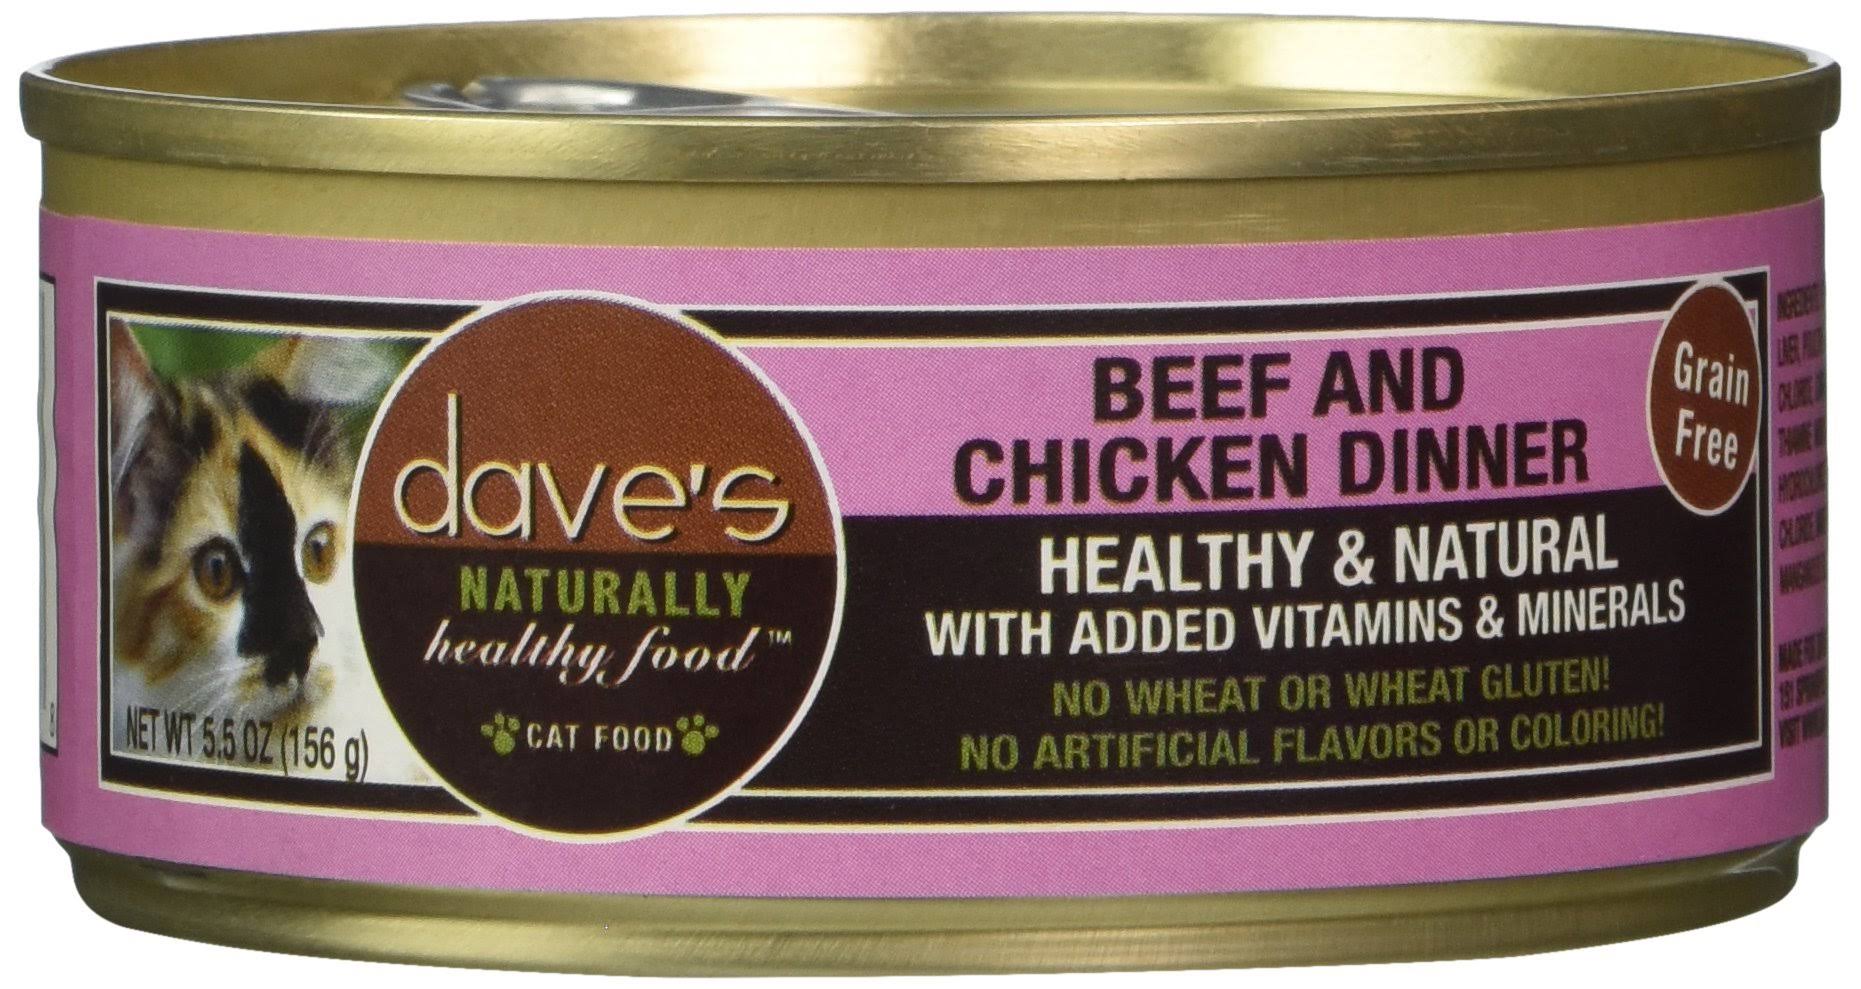 Dave's Naturally Health Food Cat Food - Beef and Chicken